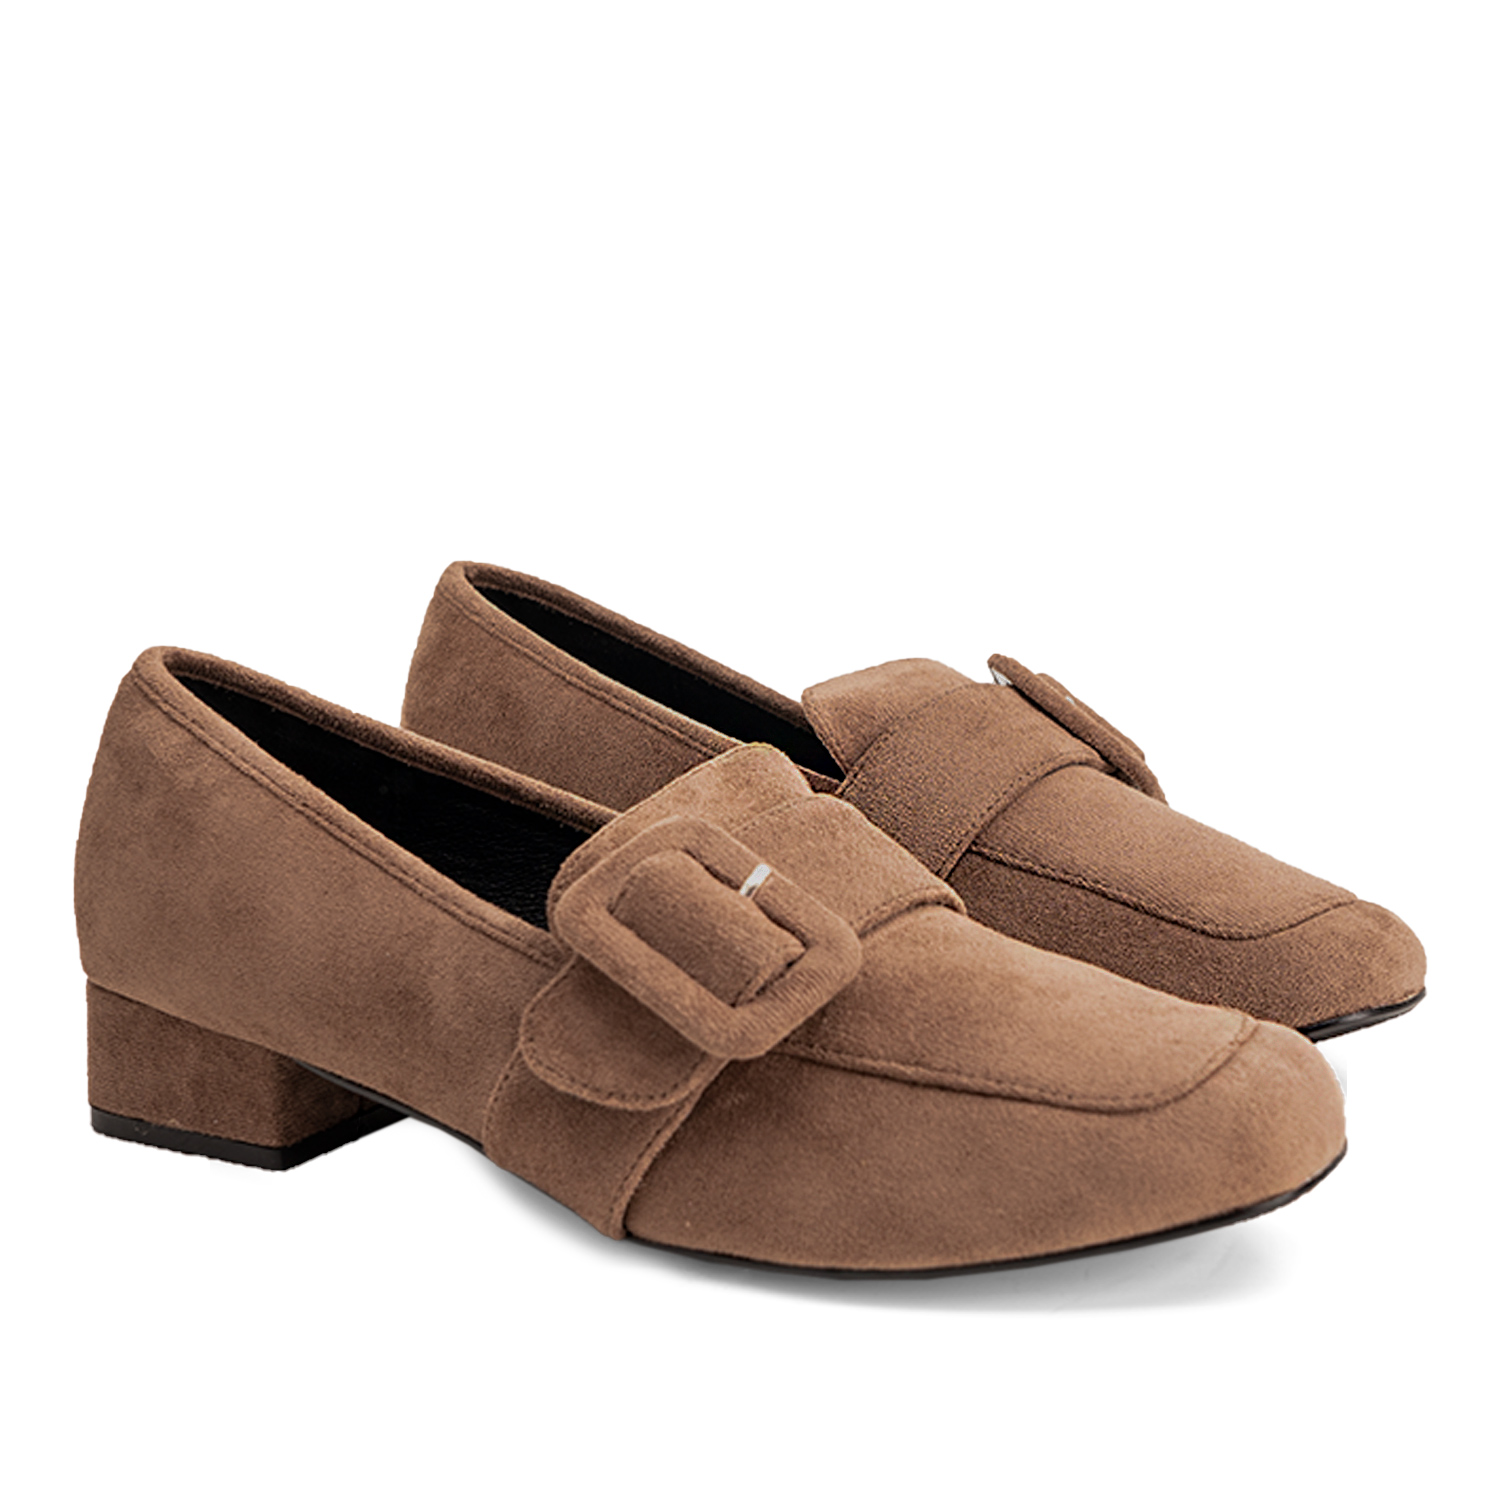 Moccasins in light brown faux suede and buckle detail 